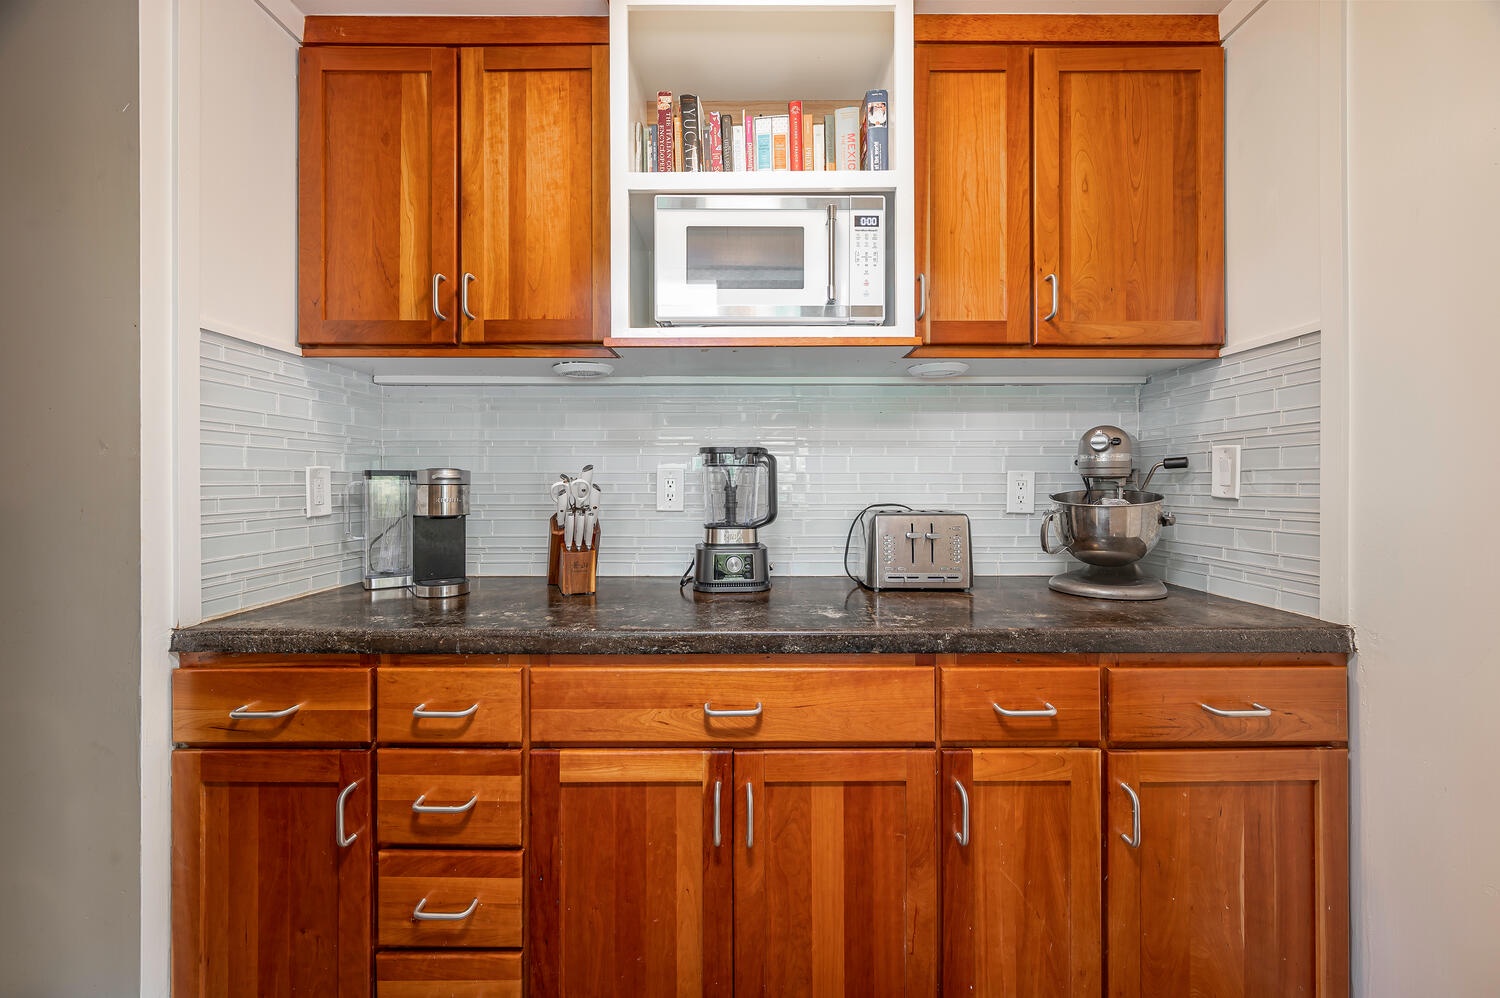 Haleiwa Vacation Rentals, Mele Makana - The butler's pantry contains your smaller appliances (blender, toaster, mixer, coffee maker, and more)